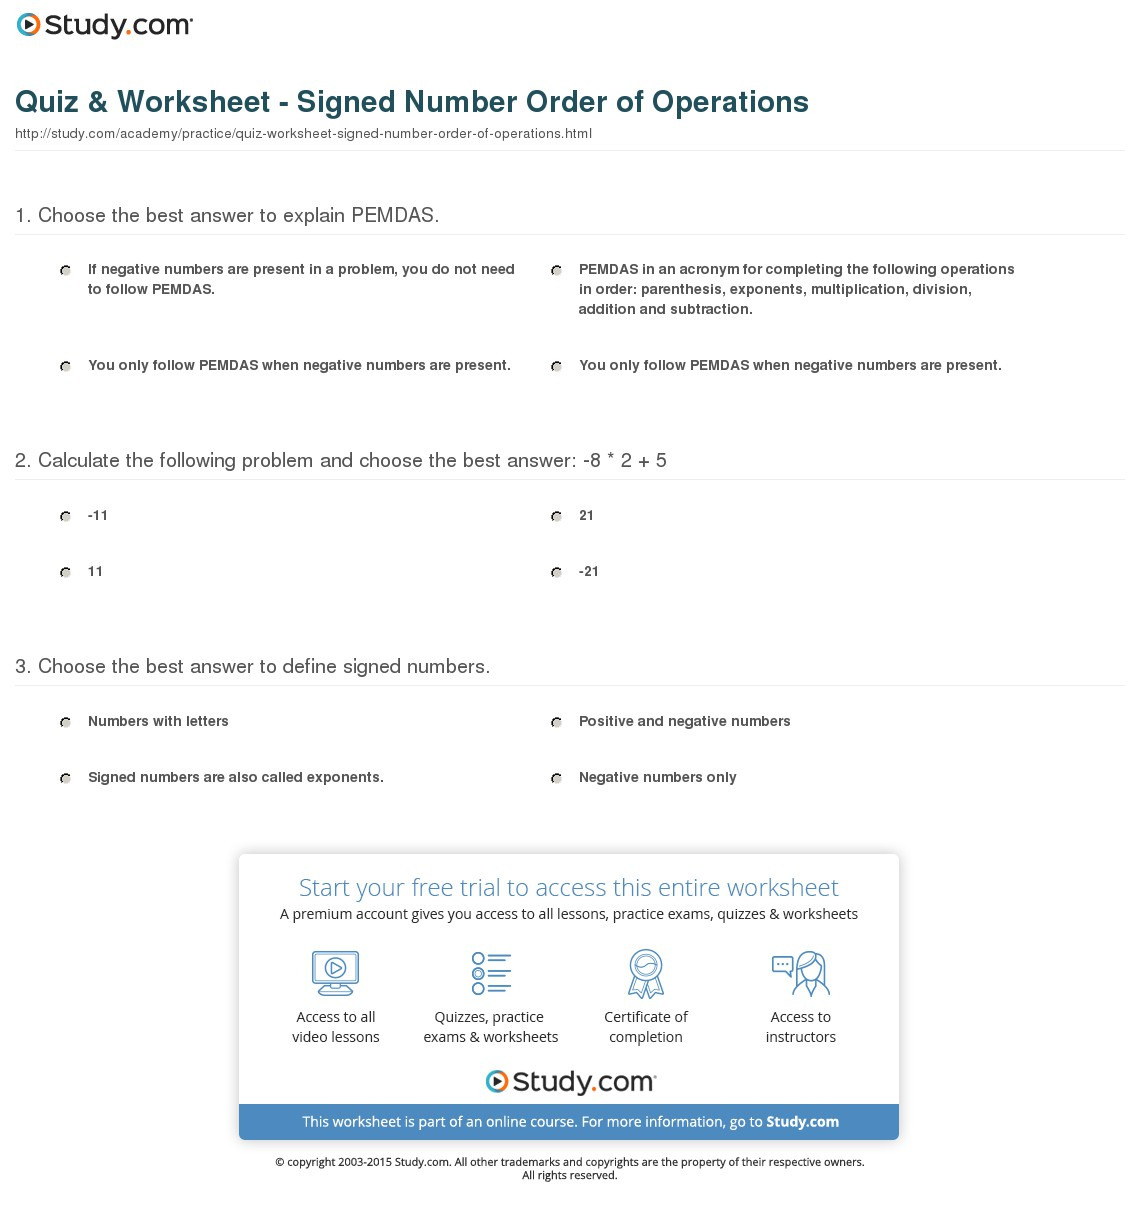 quiz-worksheet-signed-number-order-of-operations-study-db-excel